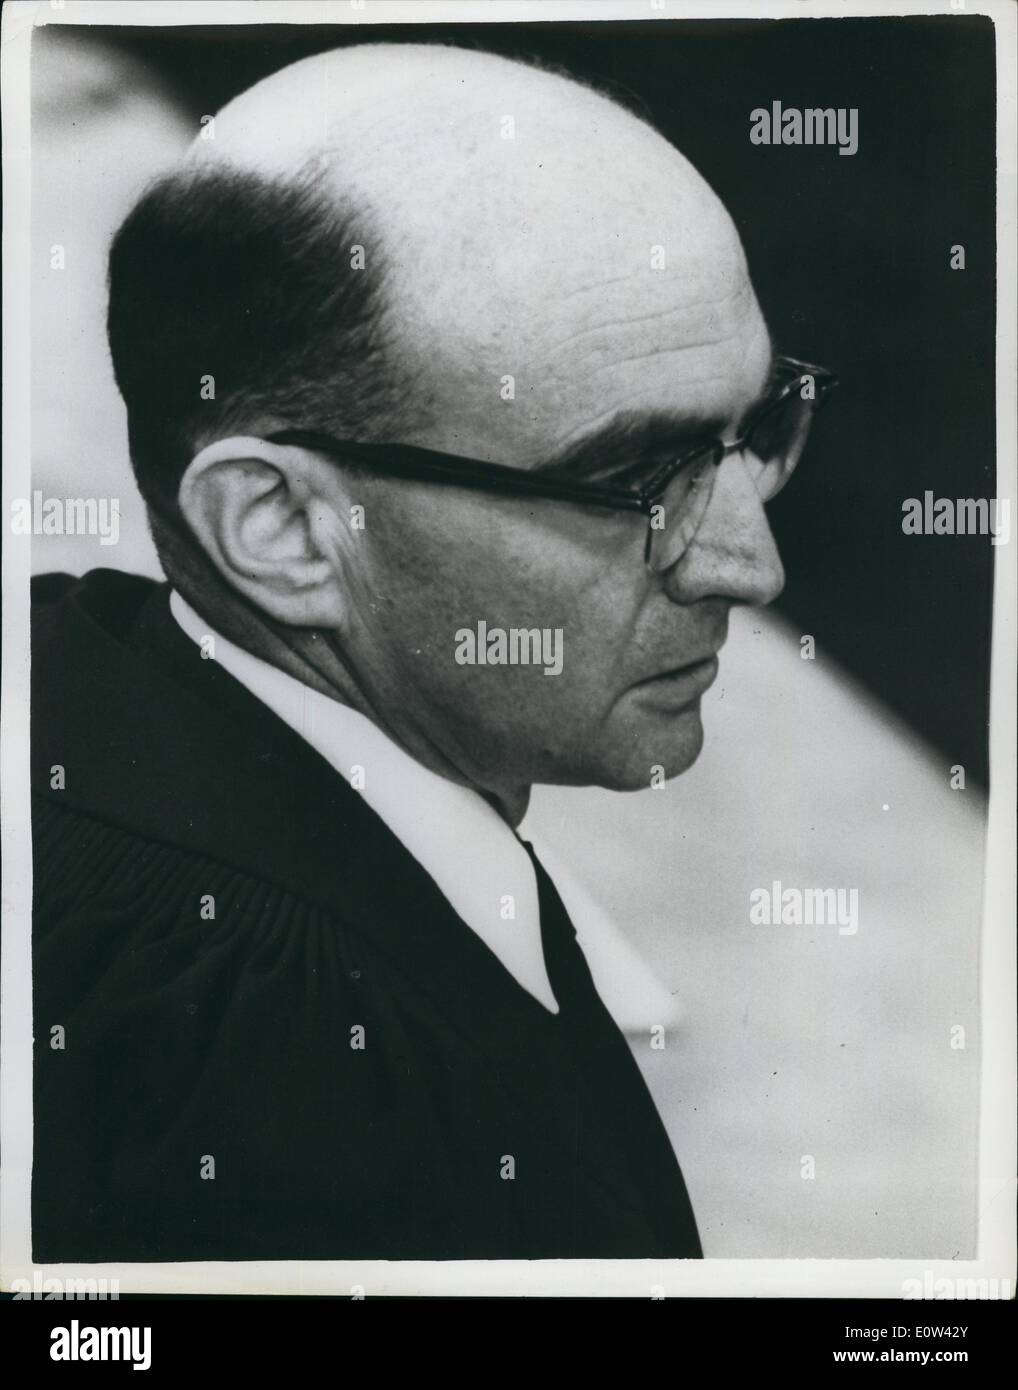 Apr. 04, 1961 - Trial of Adolf Eichmann continues in Jerusalem. Gideon Hausner - prosecution counsel.: The trial continues in Jerusalem of Adolf Eichmann former Nazi s.s. Colonel - accused of the mass murder of Jews in wartime Nazi concentration camps. Photo shows Chief prosecutor Gideon Hausner 0 during the trial of Adolf Eichmann in Jerusalem. Stock Photo